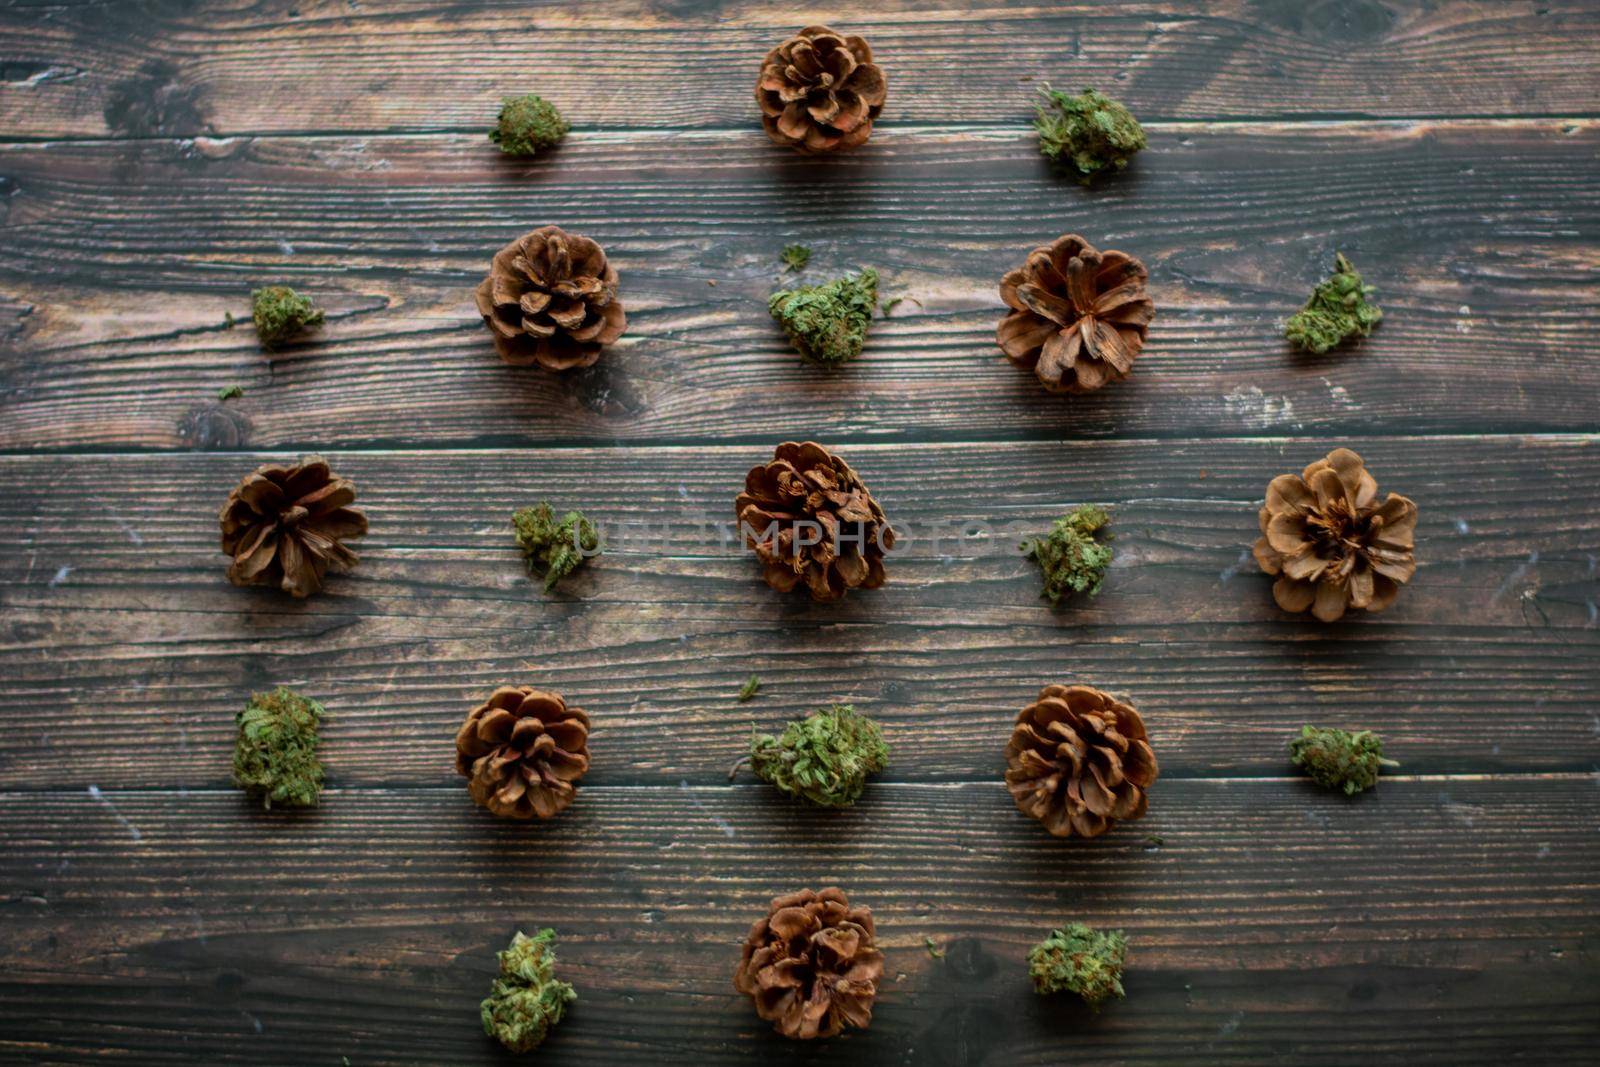 Cannabis Nugs and Pinecones on a Wooden Background by bju12290